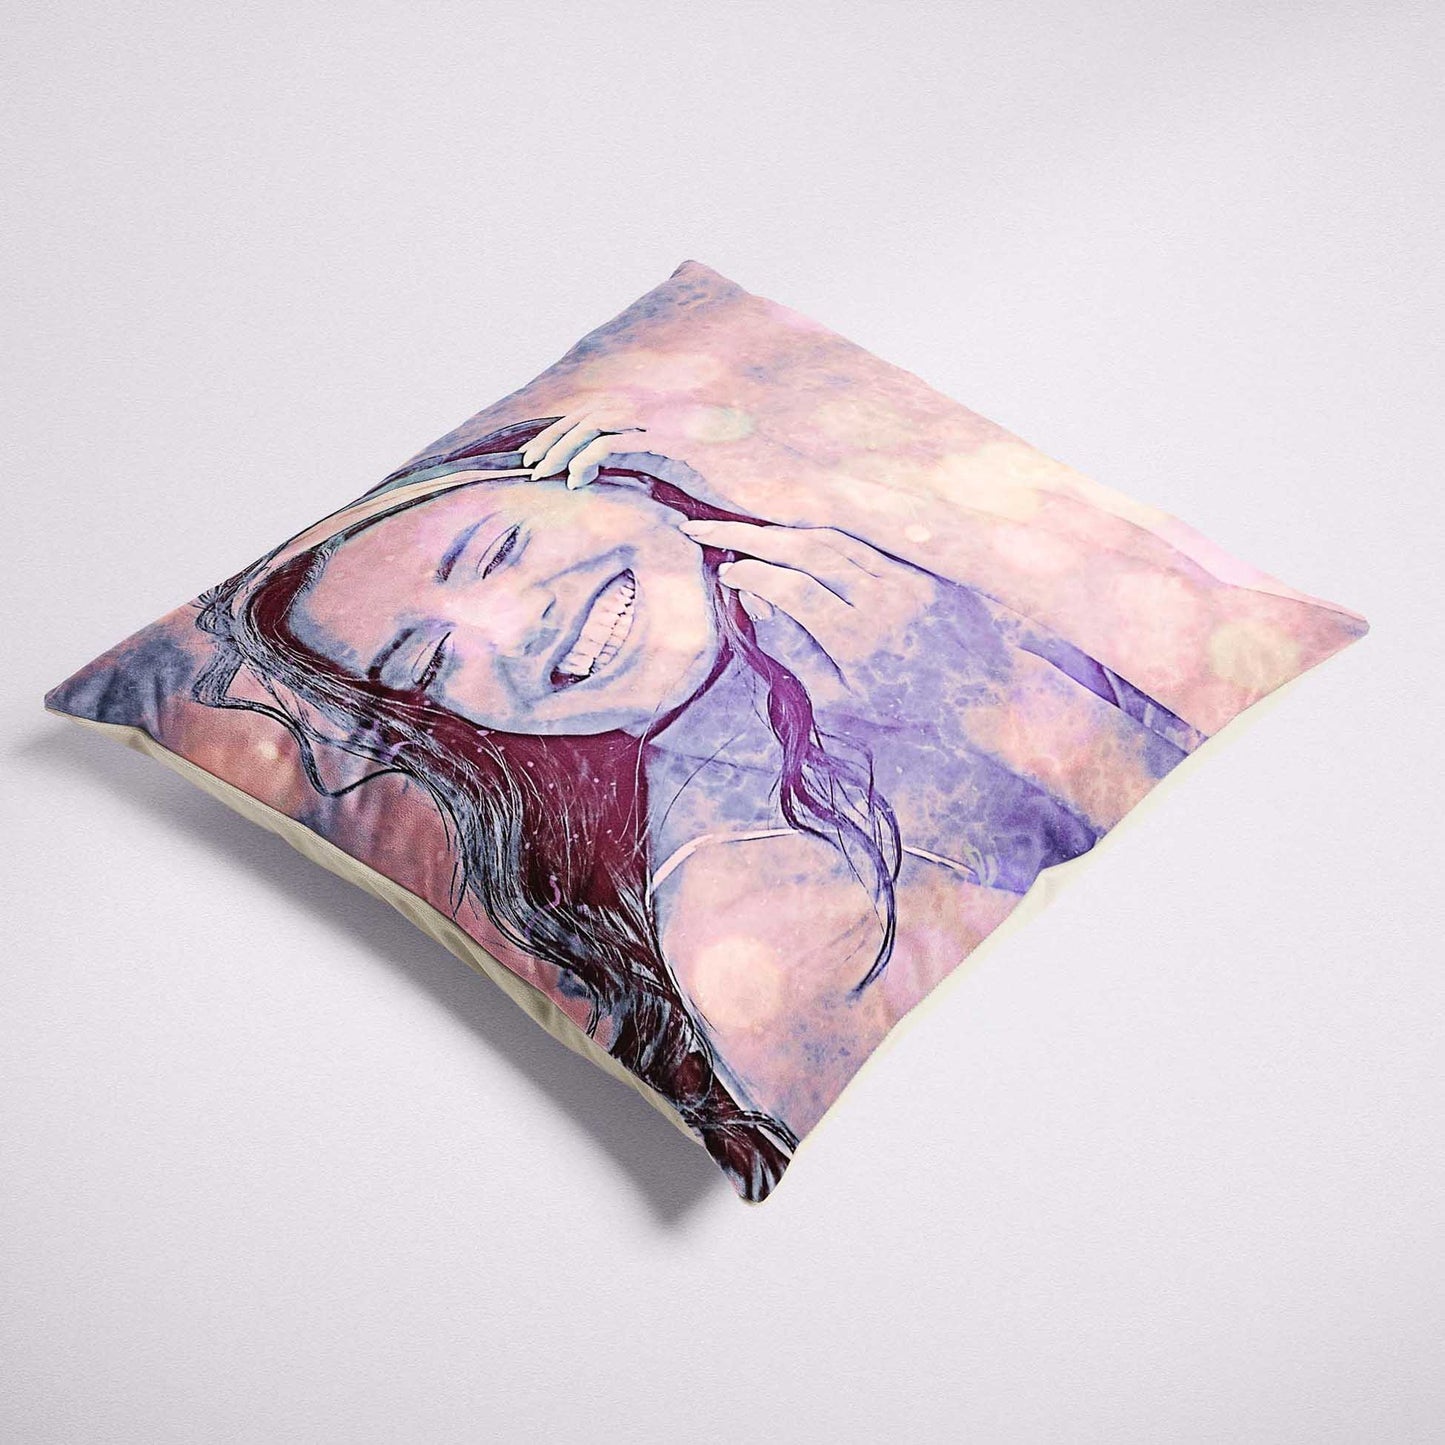 The Personalised Special Purple FX Cushion is a luxurious and personalized addition to your home decor. Custom-made to your specifications, it showcases a unique and original print that adds vibrancy and brightness to any interior